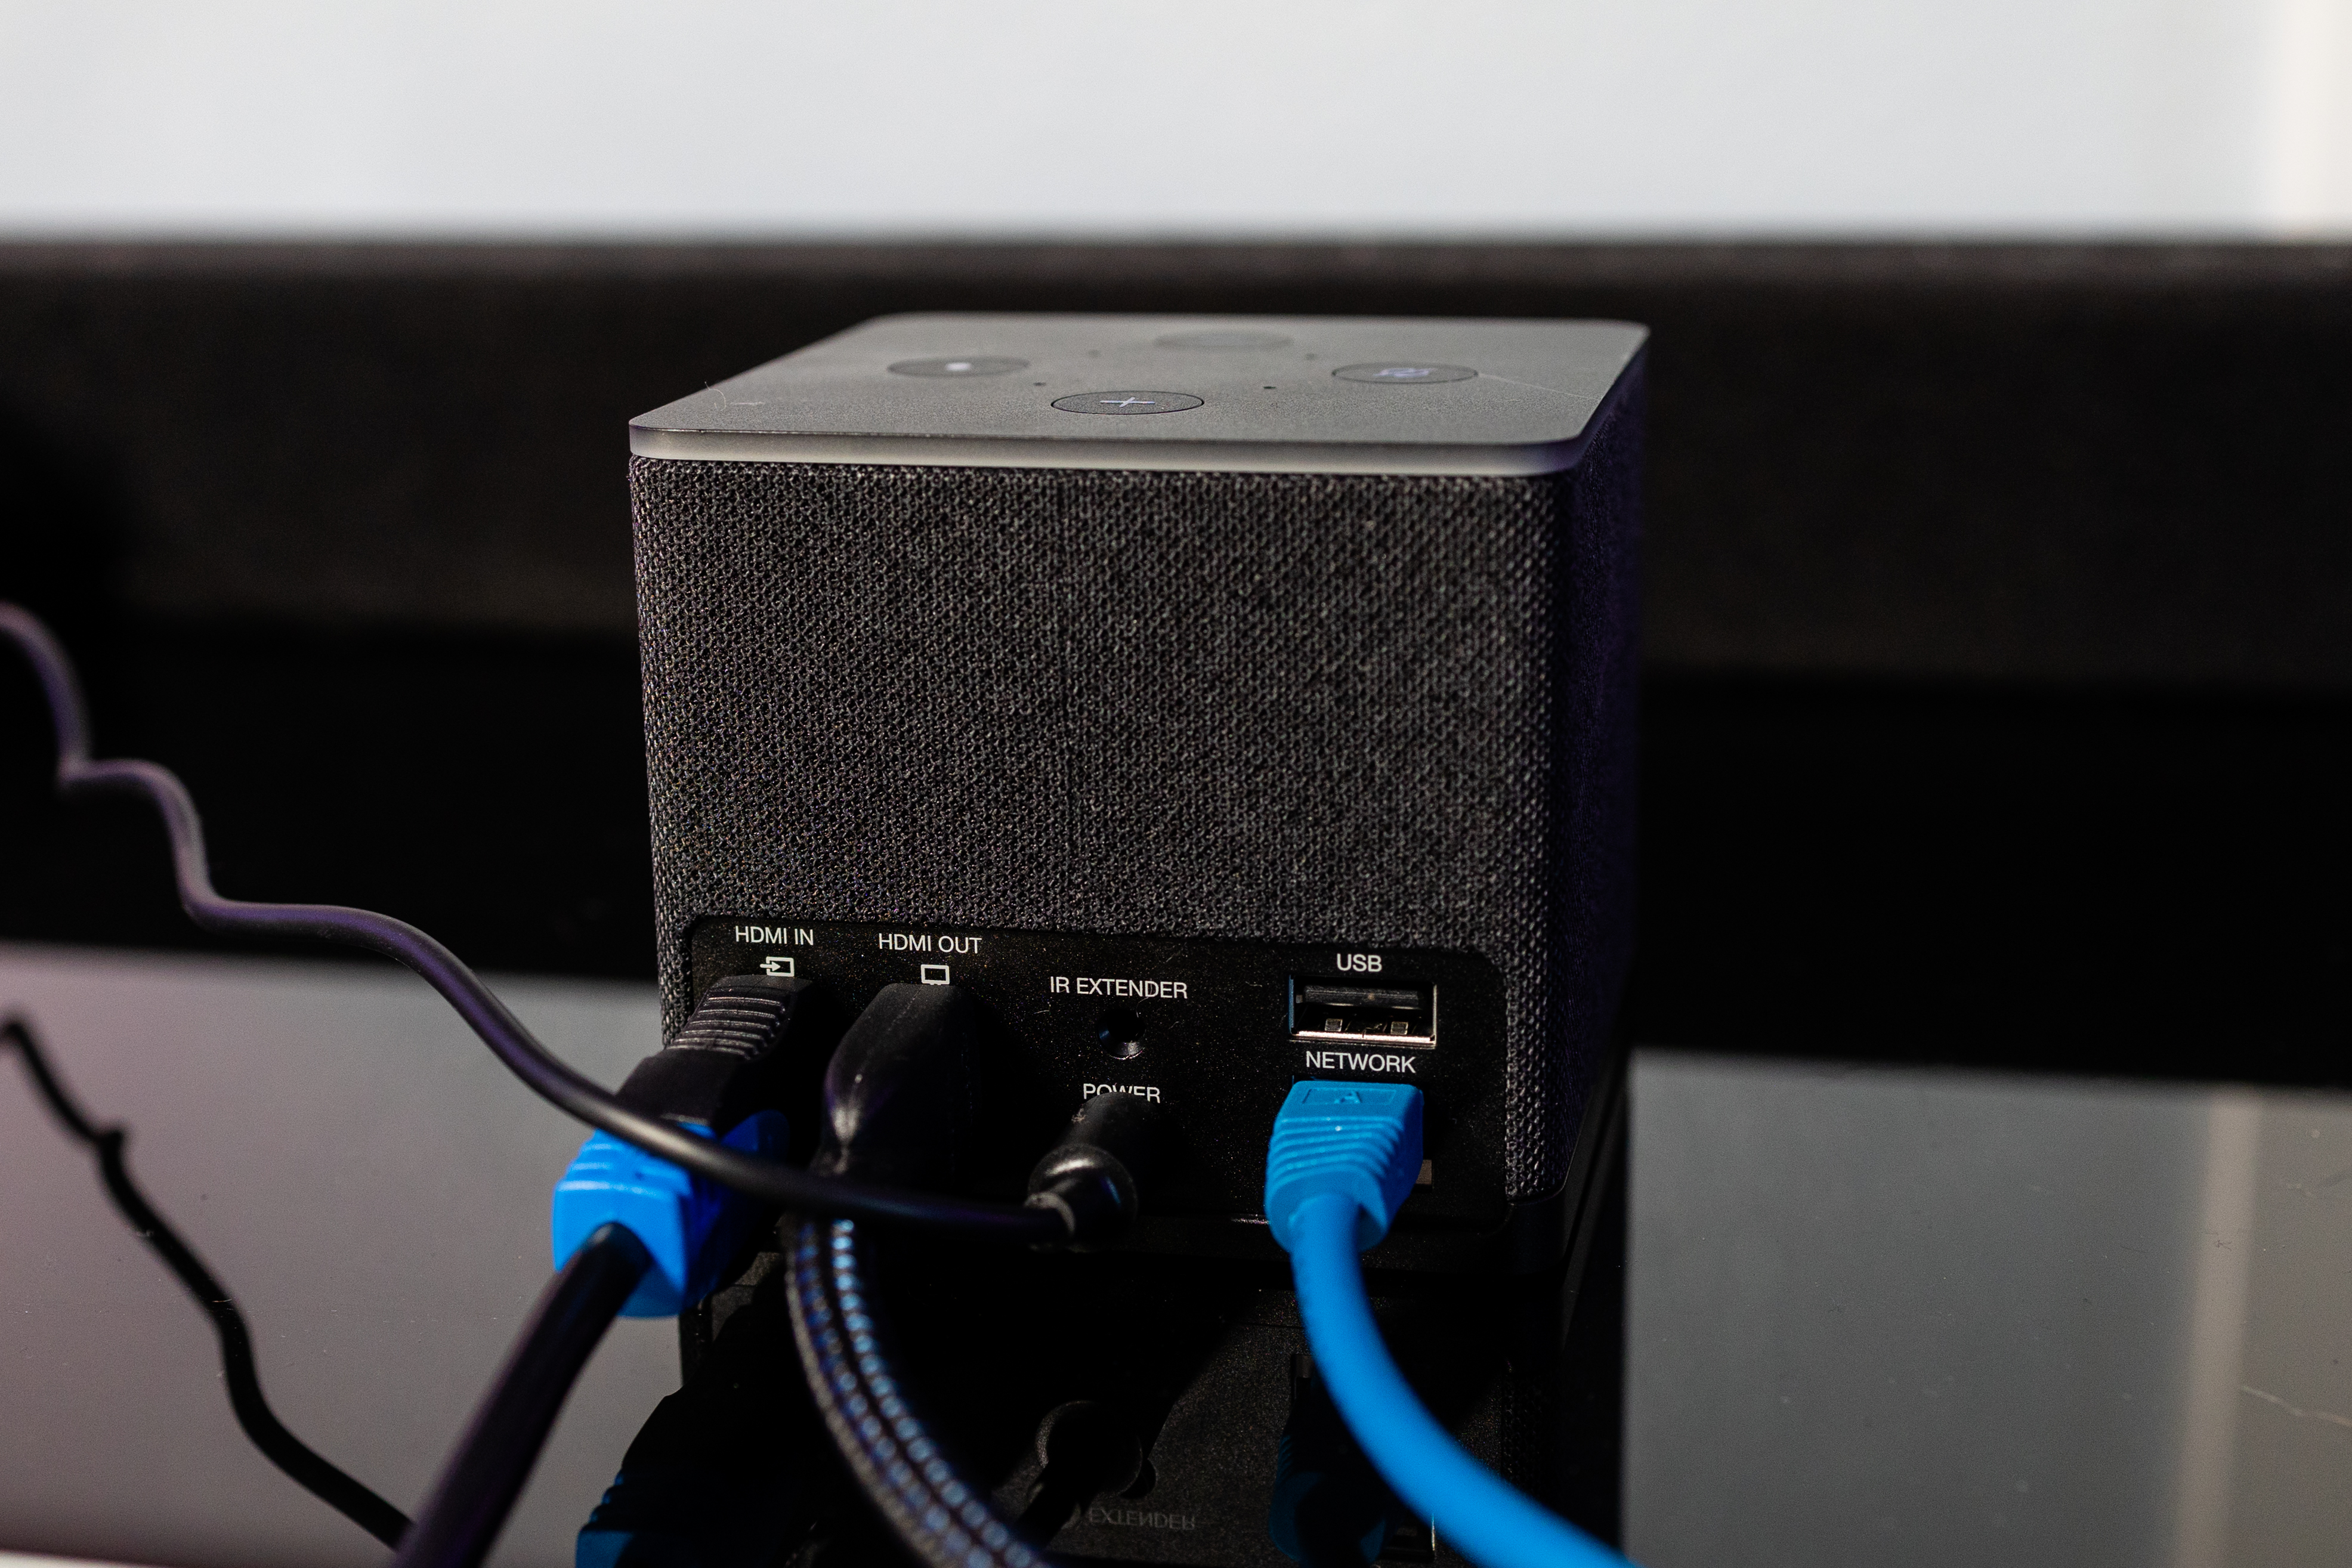 How to Set up a Fire TV Cube